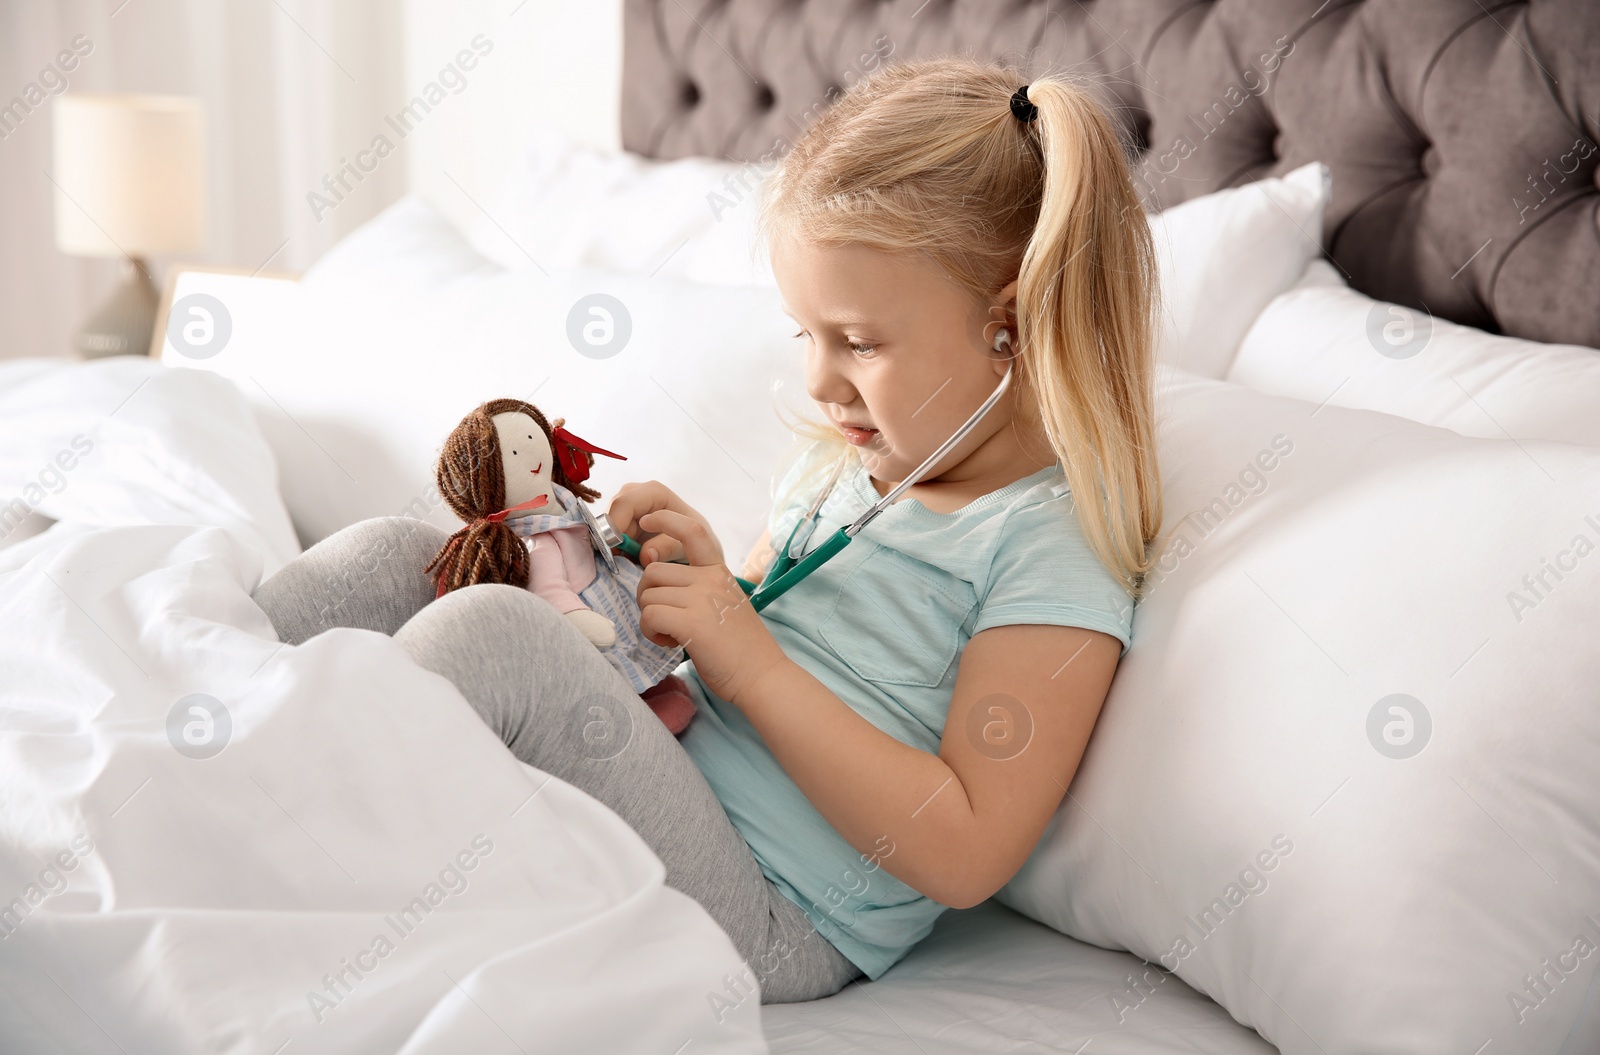 Photo of Cute child imagining herself as doctor while playing with stethoscope and doll at home